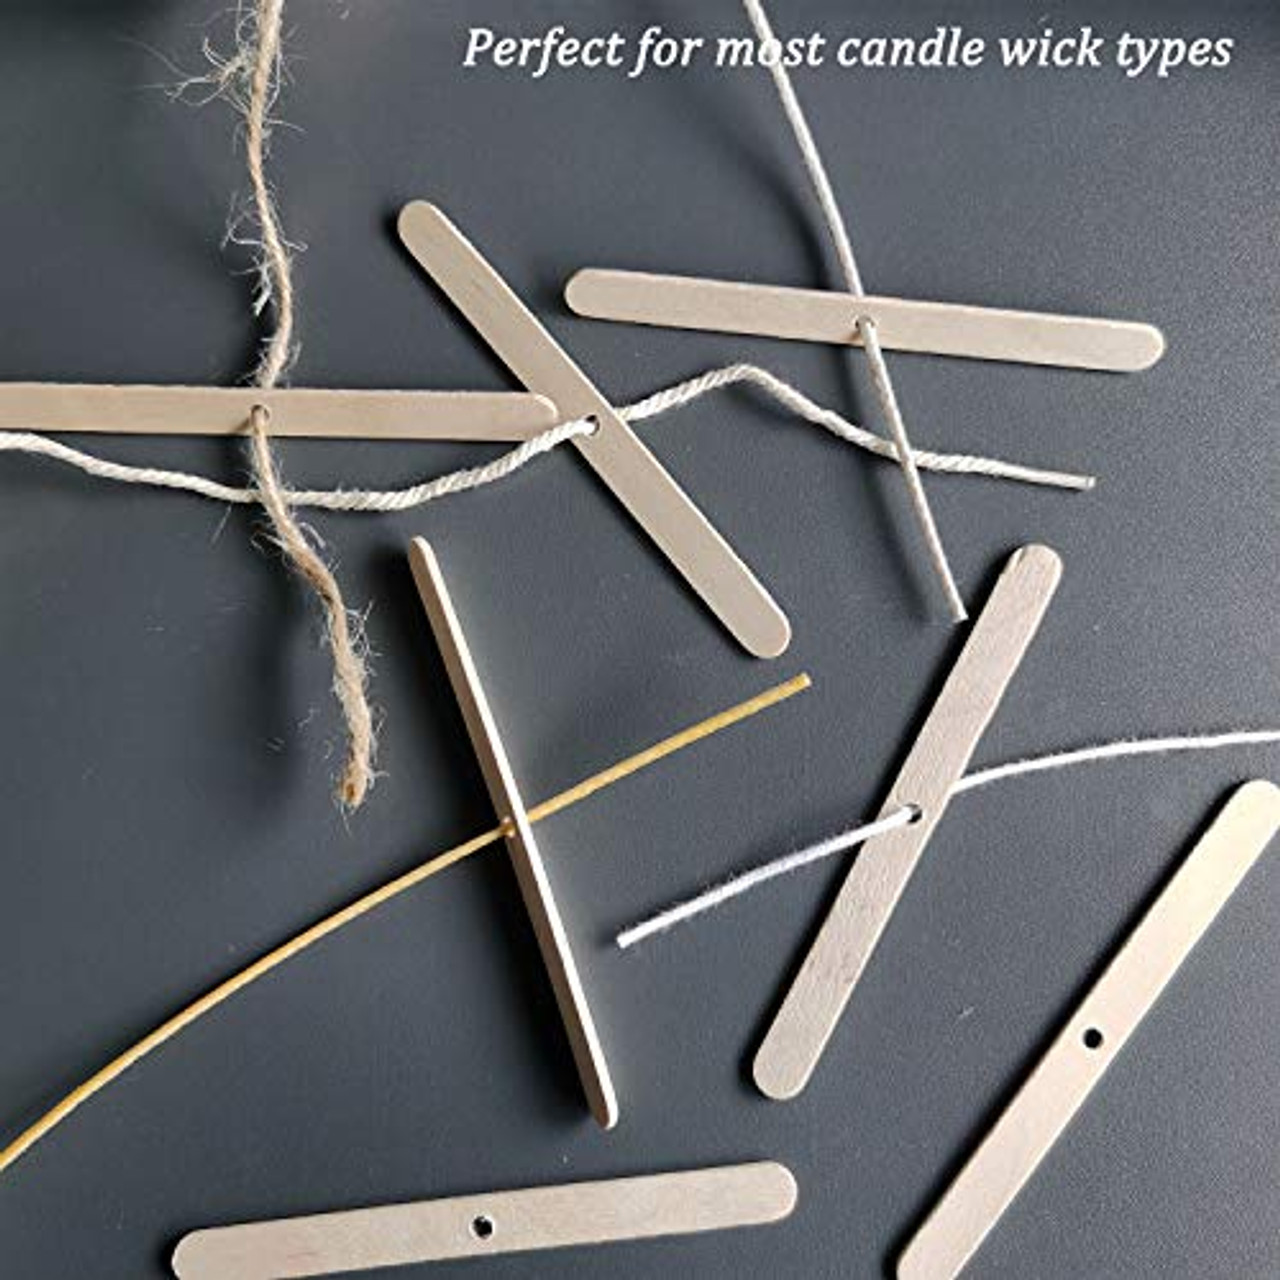 MILIVIXAY Wooden Candle Wick Holders,Candle Wicks Centering Device,Candle Wick Bars,Wick Holders for Candle Making,Wick Clips for Candles,Candle